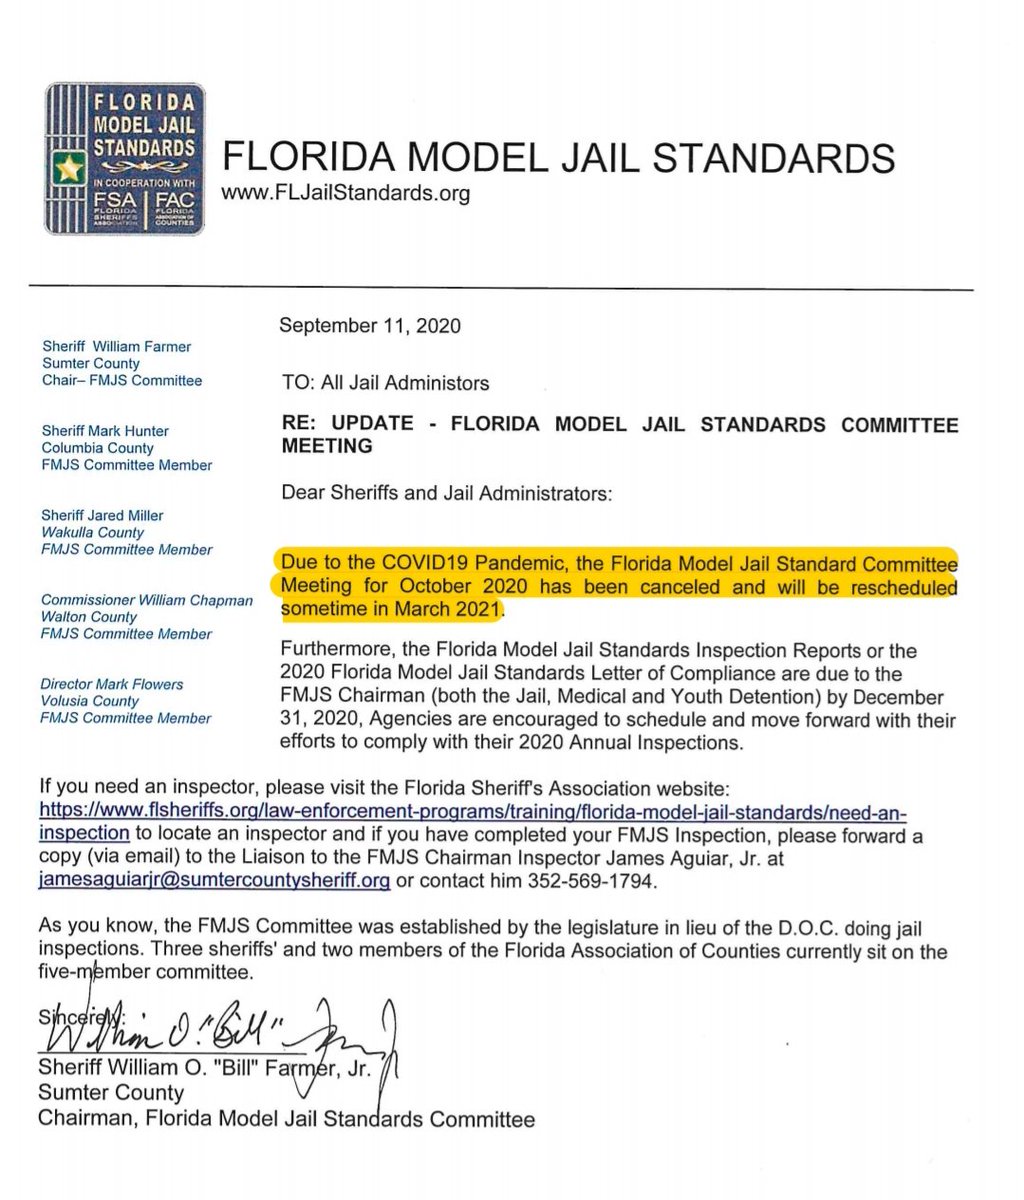 The FMJS Committee not only suspended the inspection requirement for jails in 2020, they didn't have any meetings whatsoever about COVID-19 last year.They were supposed to meet in October 2020, and instead they cancelled the meeting. They rescheduled it for "sometime in March."